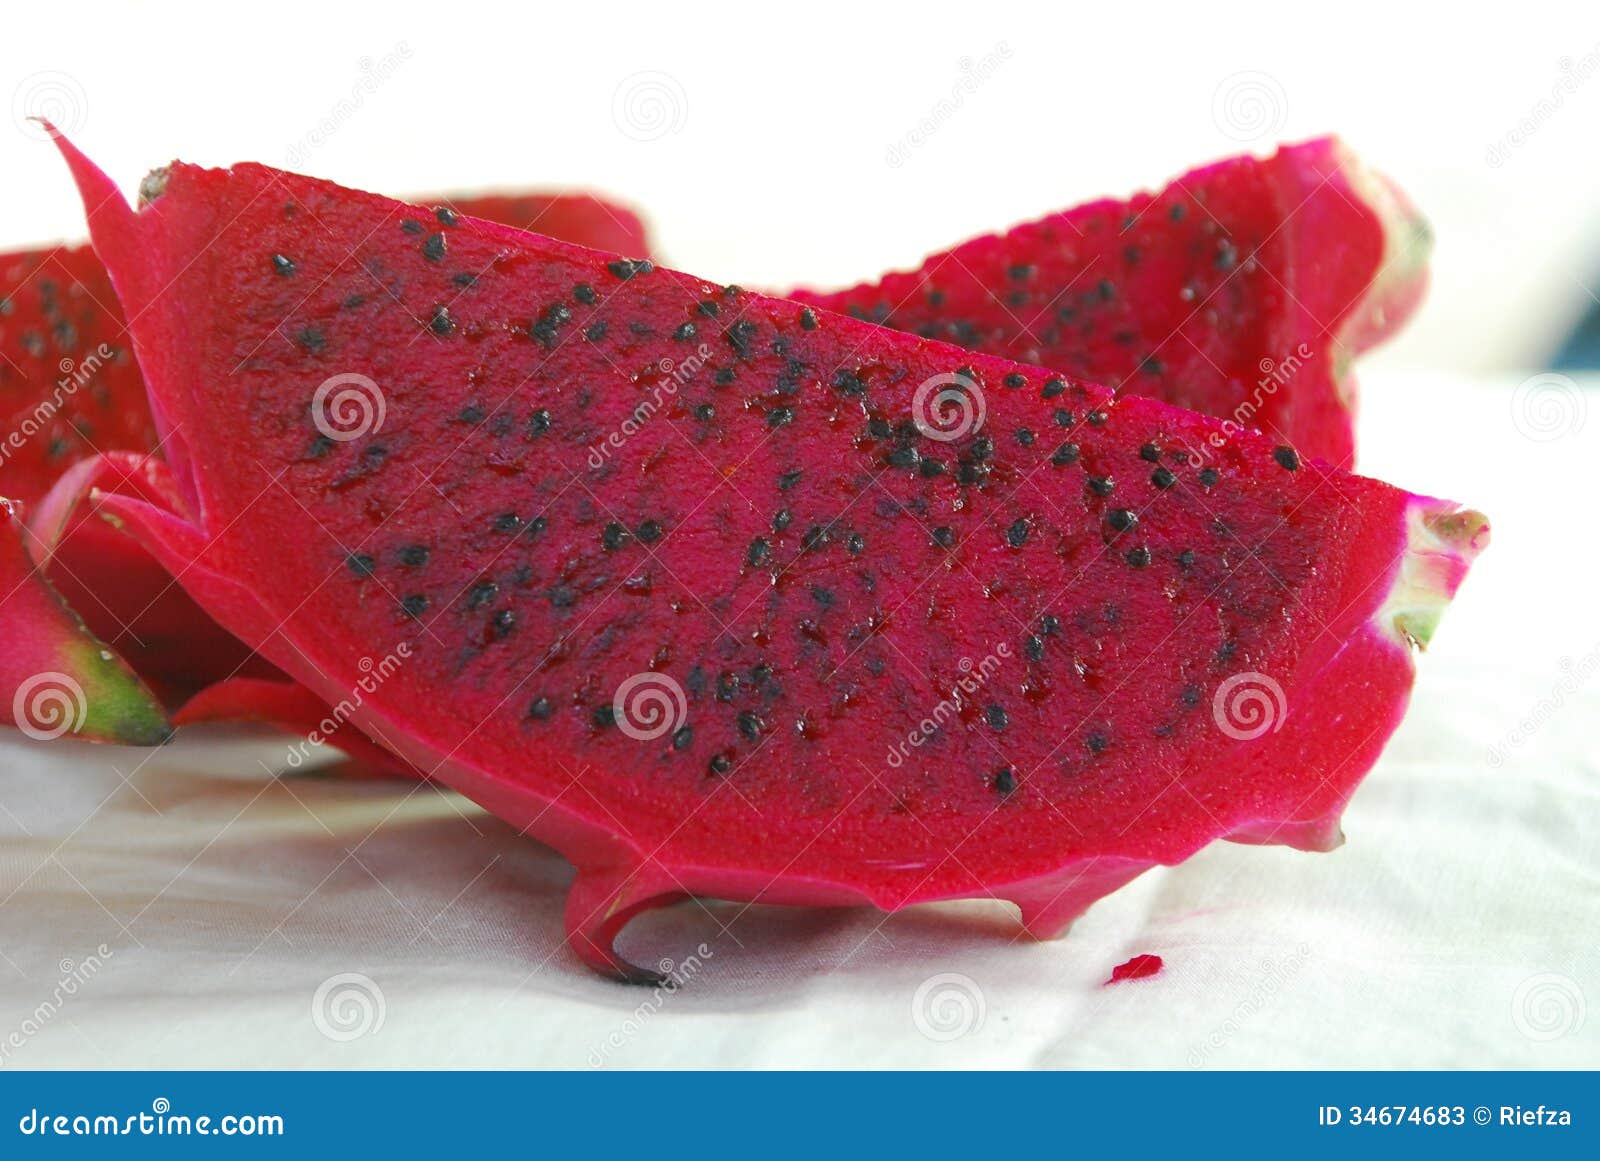 fresh and delicious red dragon fruit transection, buah naga merah. 